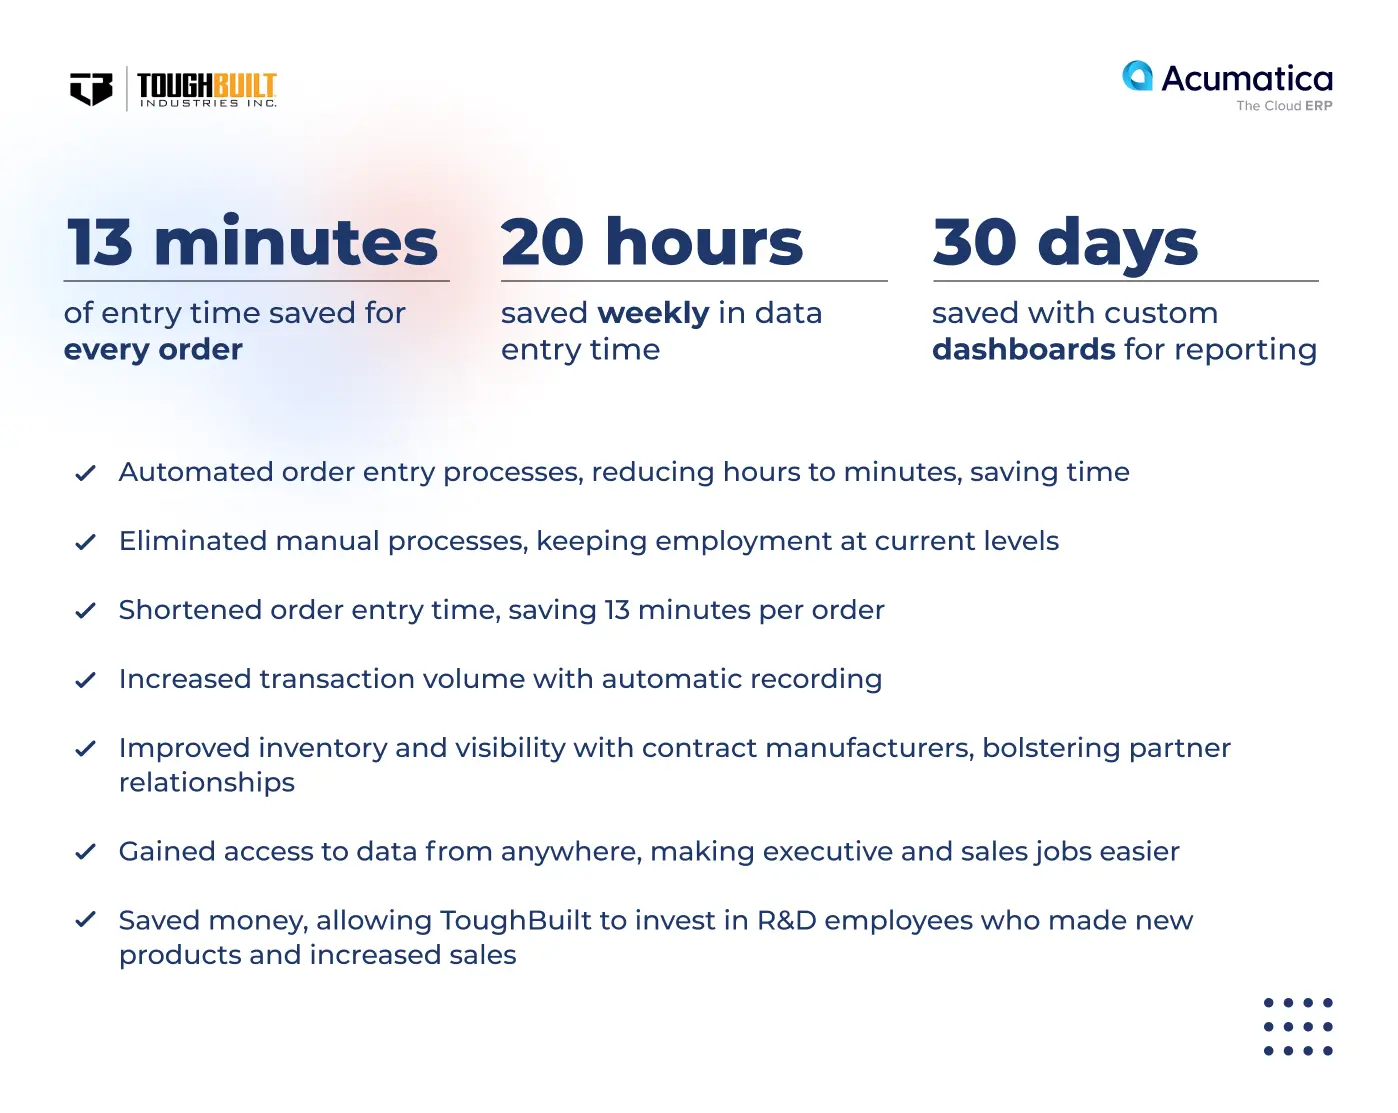 Key Results of Toughbuilt with Acumatica Cloud ERP